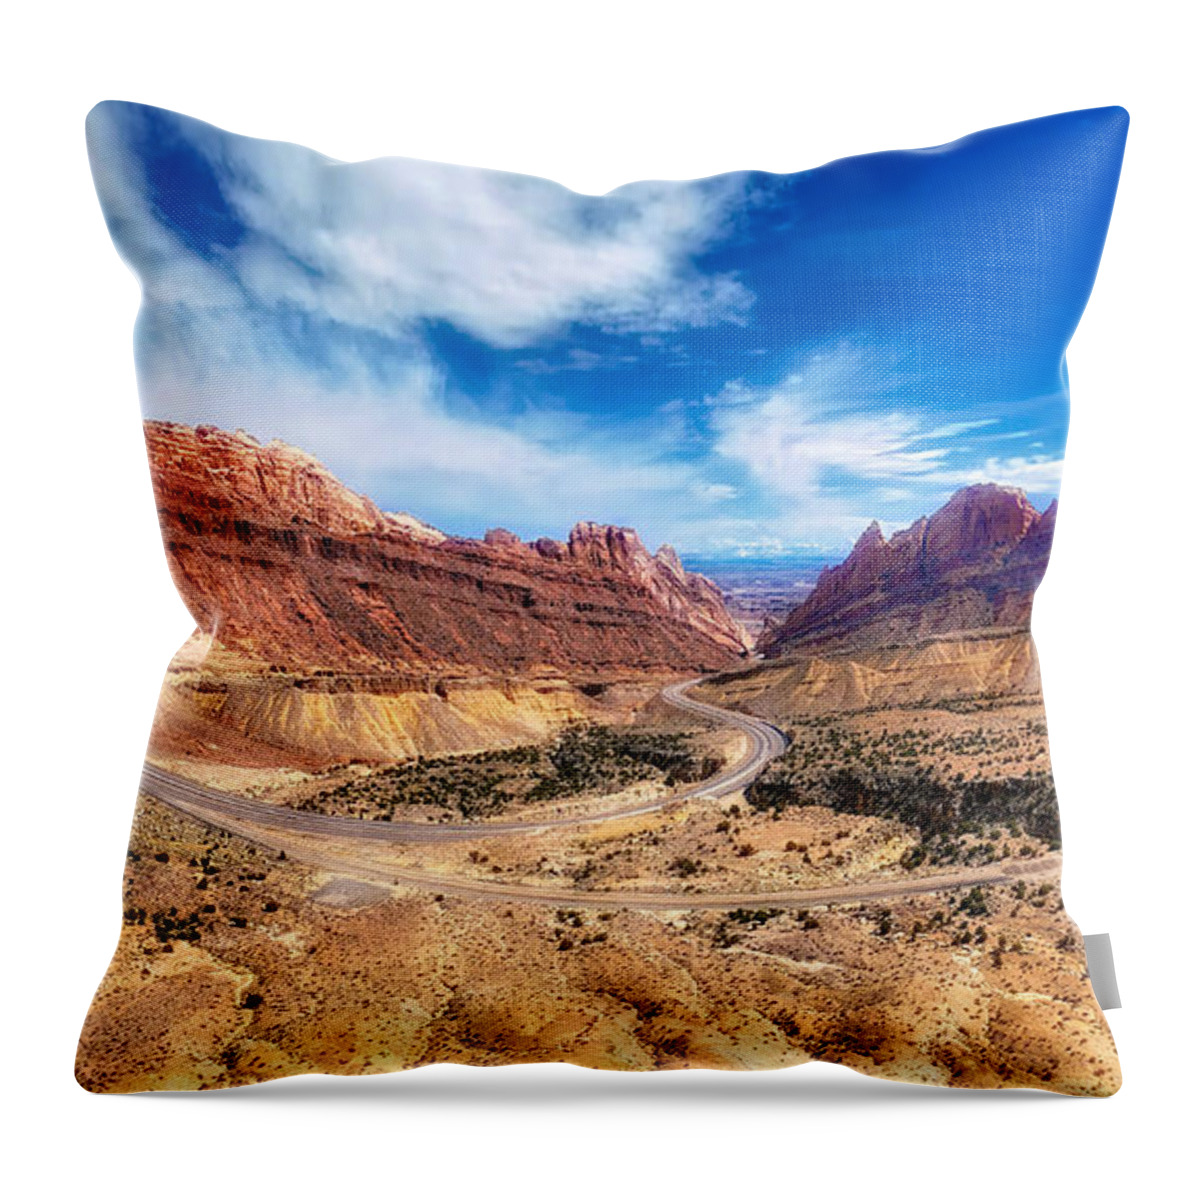 Photograph Throw Pillow featuring the photograph Interstate 70 Through Utah Canyon by John A Rodriguez